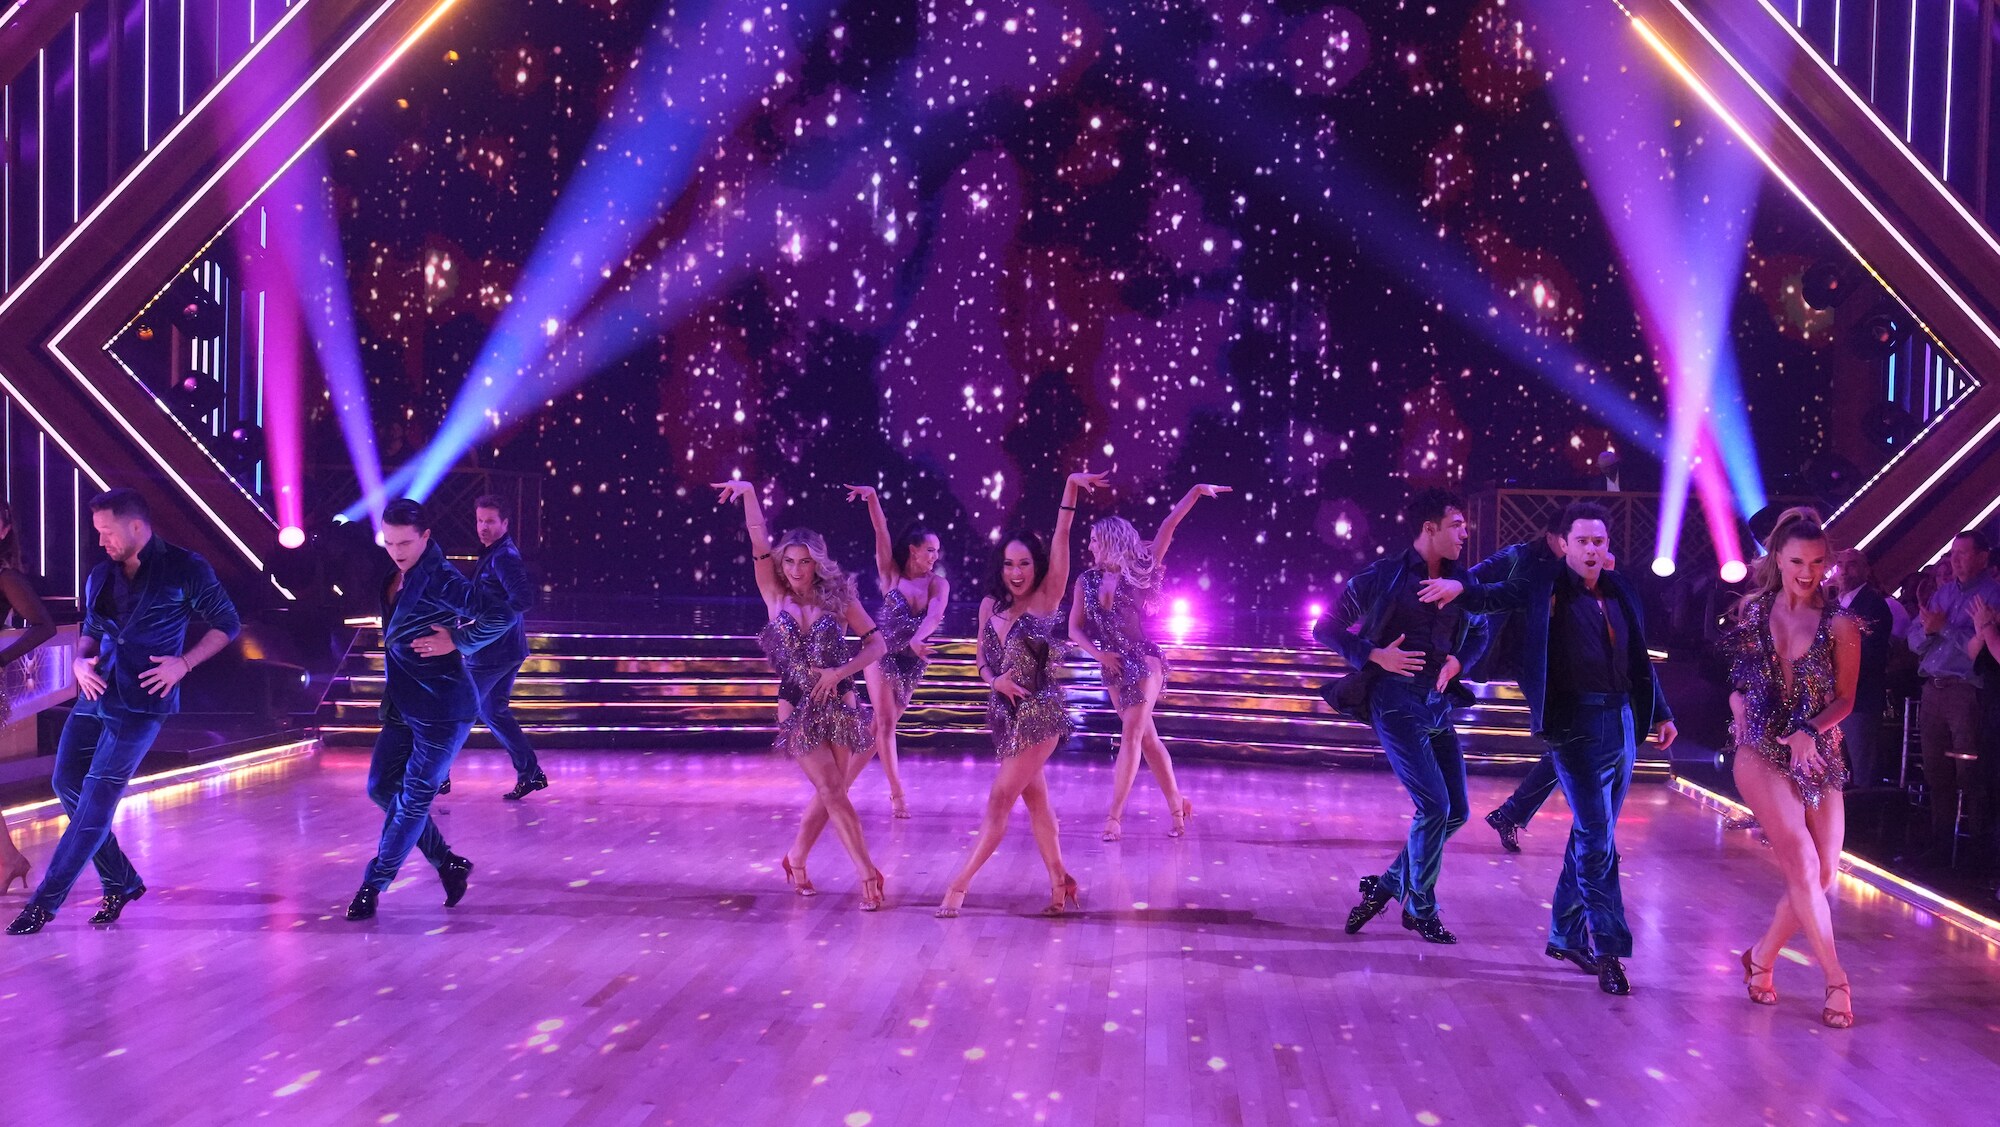 DANCING WITH THE STARS - “Finale” – The four finalists perform their final two routines in hopes of winning the mirrorball trophy. Each couple will perform a redemption dance and an unforgettable freestyle routine. A new episode of “Dancing with the Stars” will stream live MONDAY, NOV. 21 (8:00pm ET / 5:00pm PT), on Disney+. (ABC/Eric McCandless) DANCING WITH THE STARS